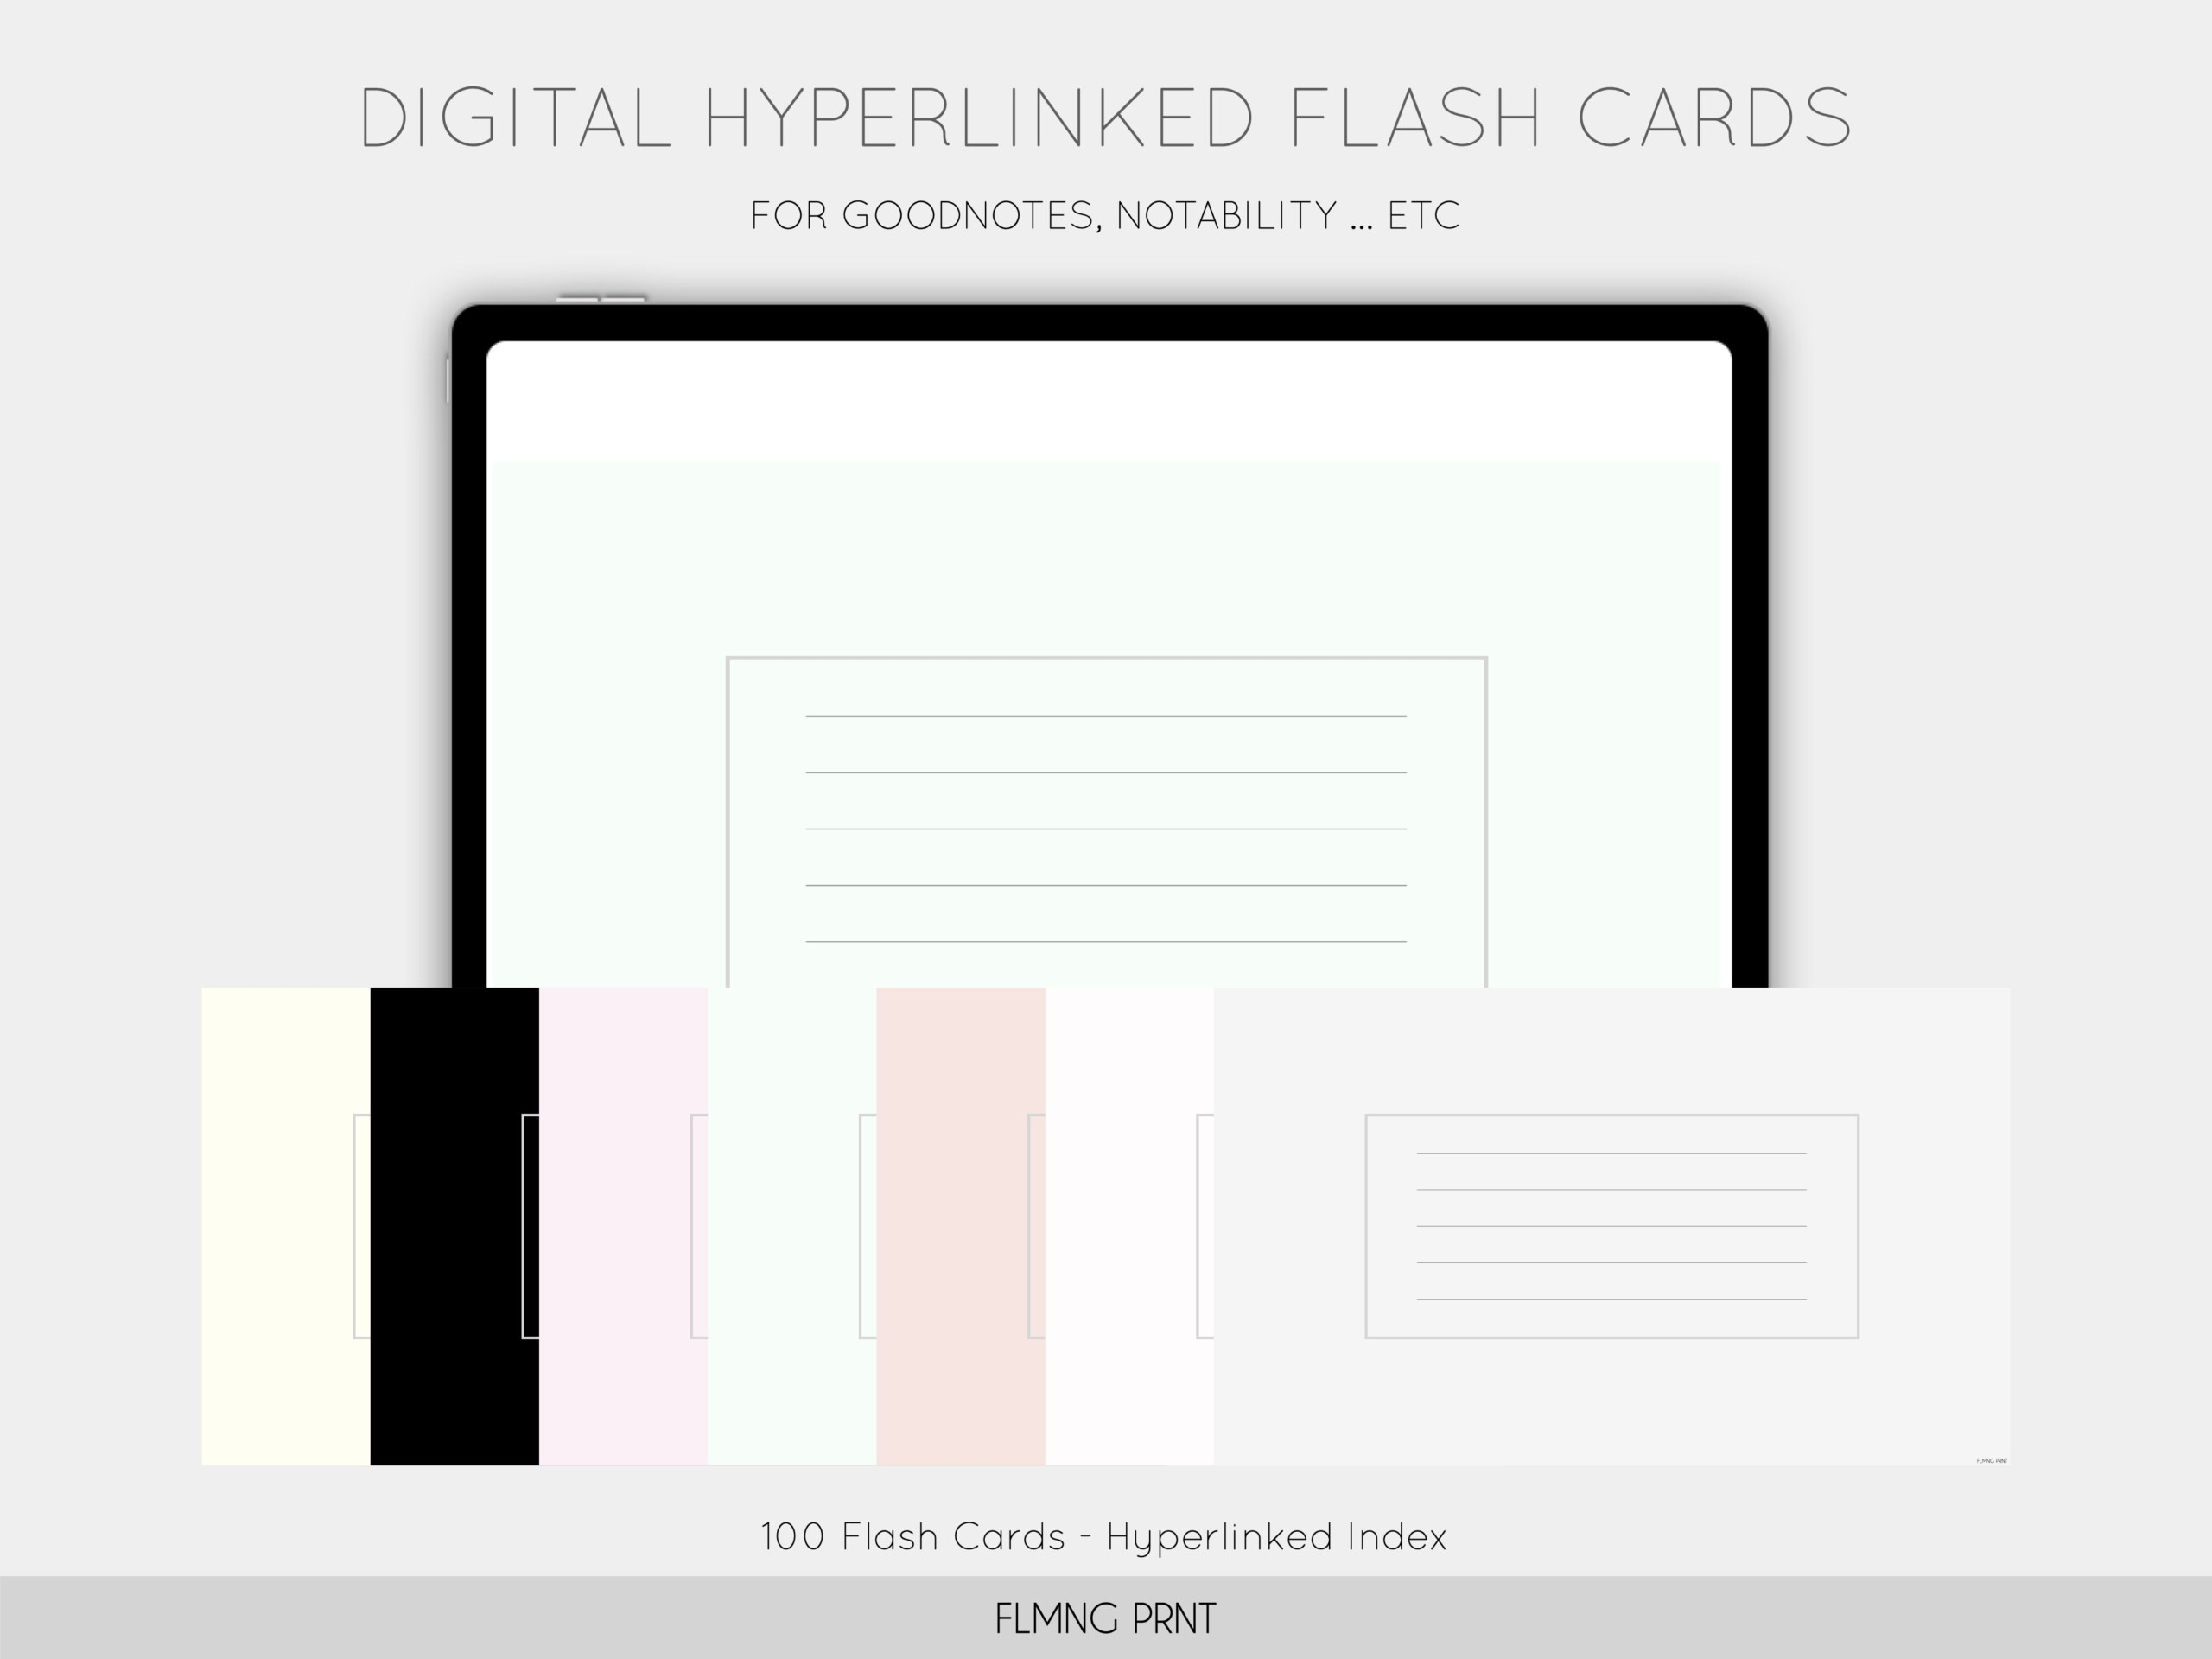 These Digital Hyperlinked Flash Cards Are Designed To Work